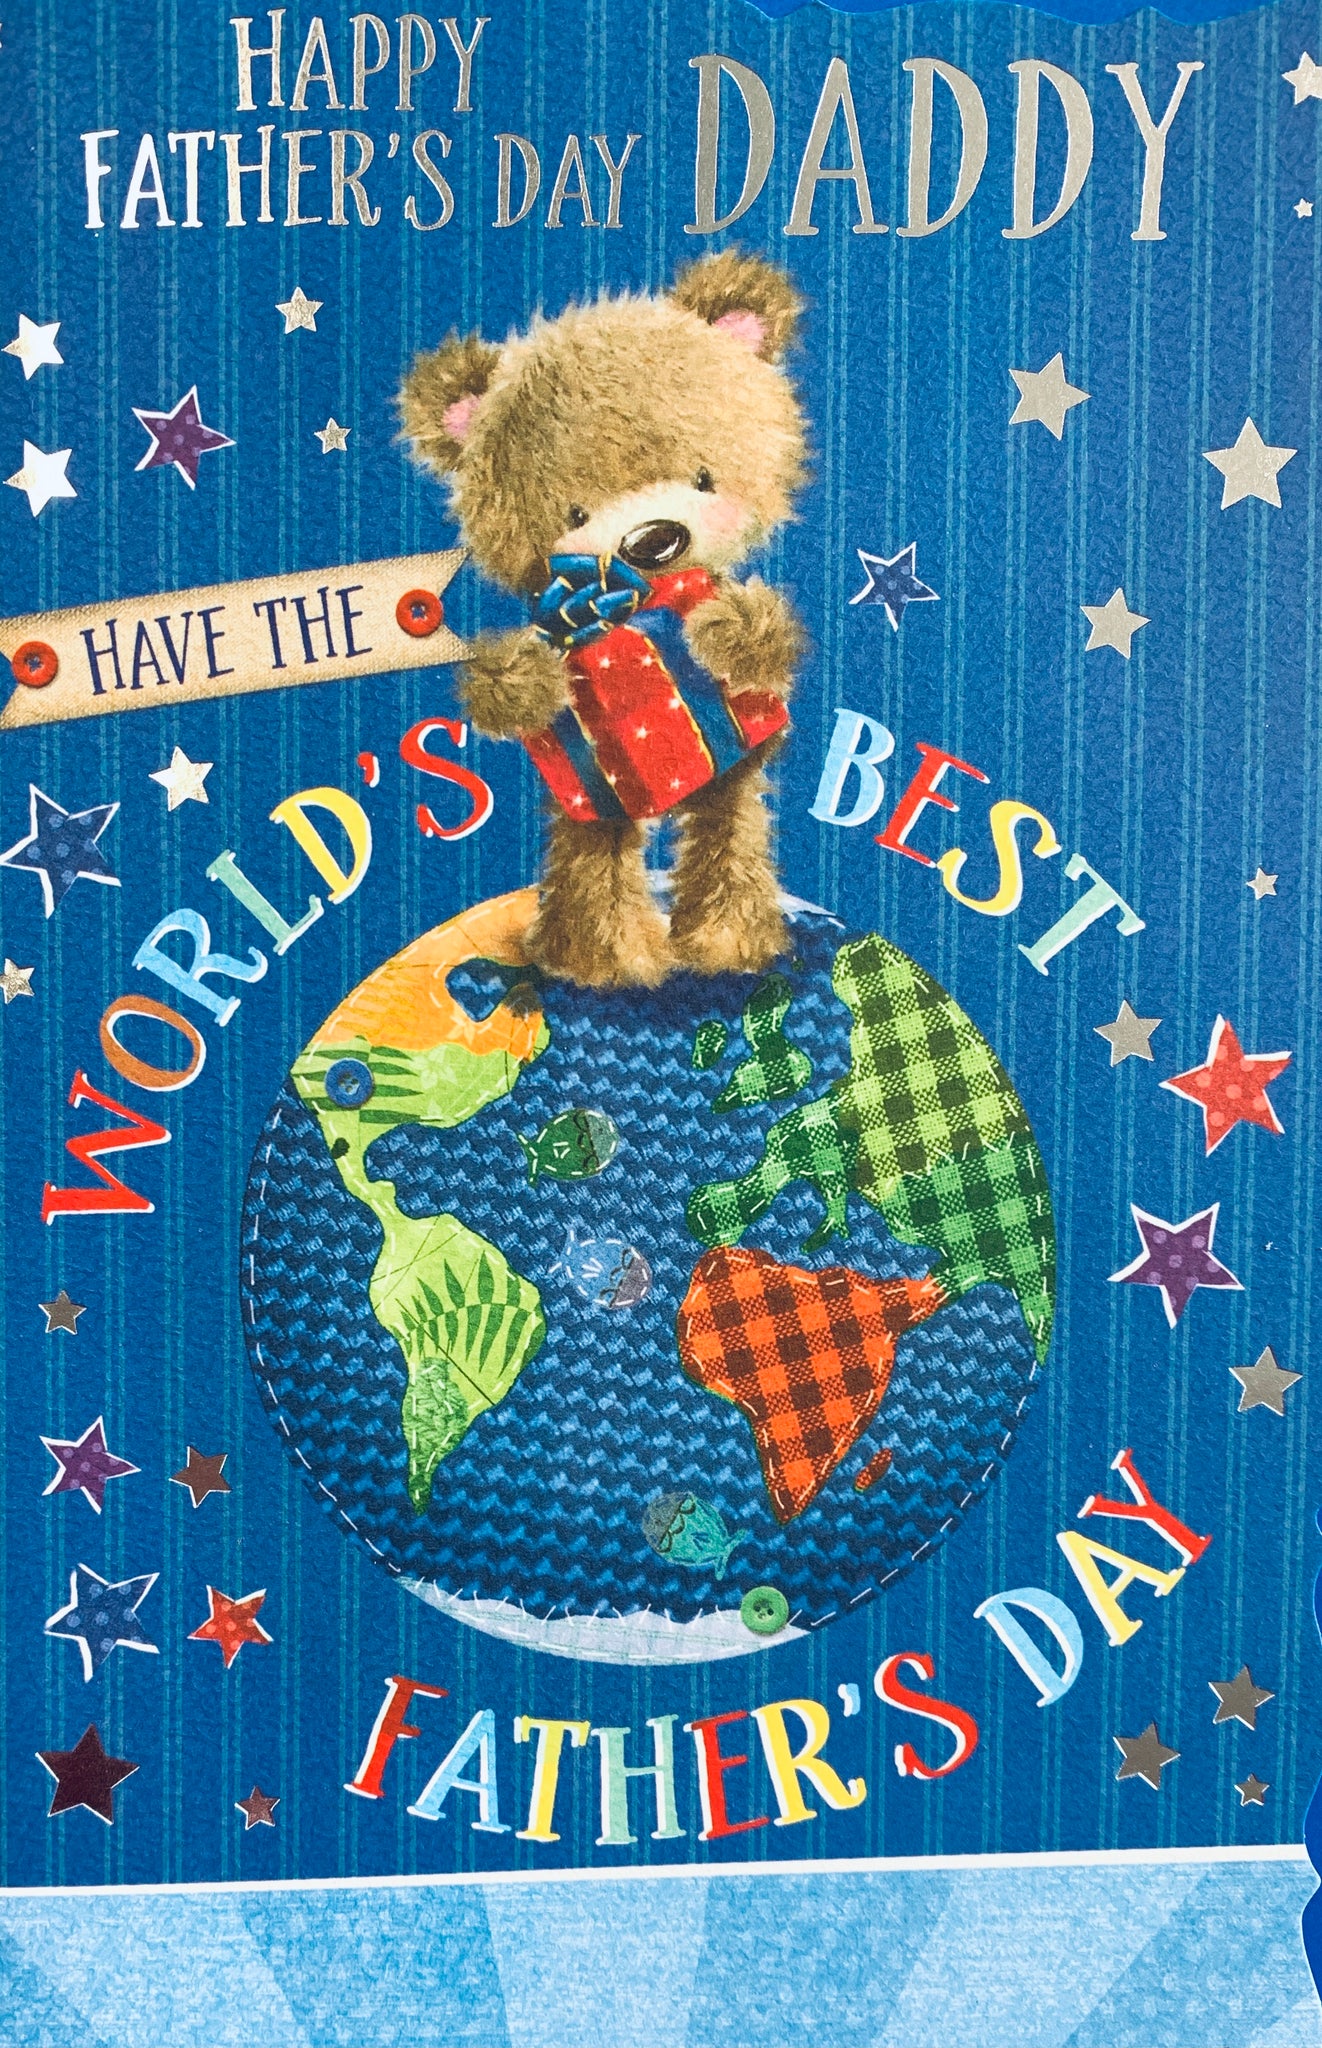 Daddy Father’s Day card cute bear worlds best Daddy